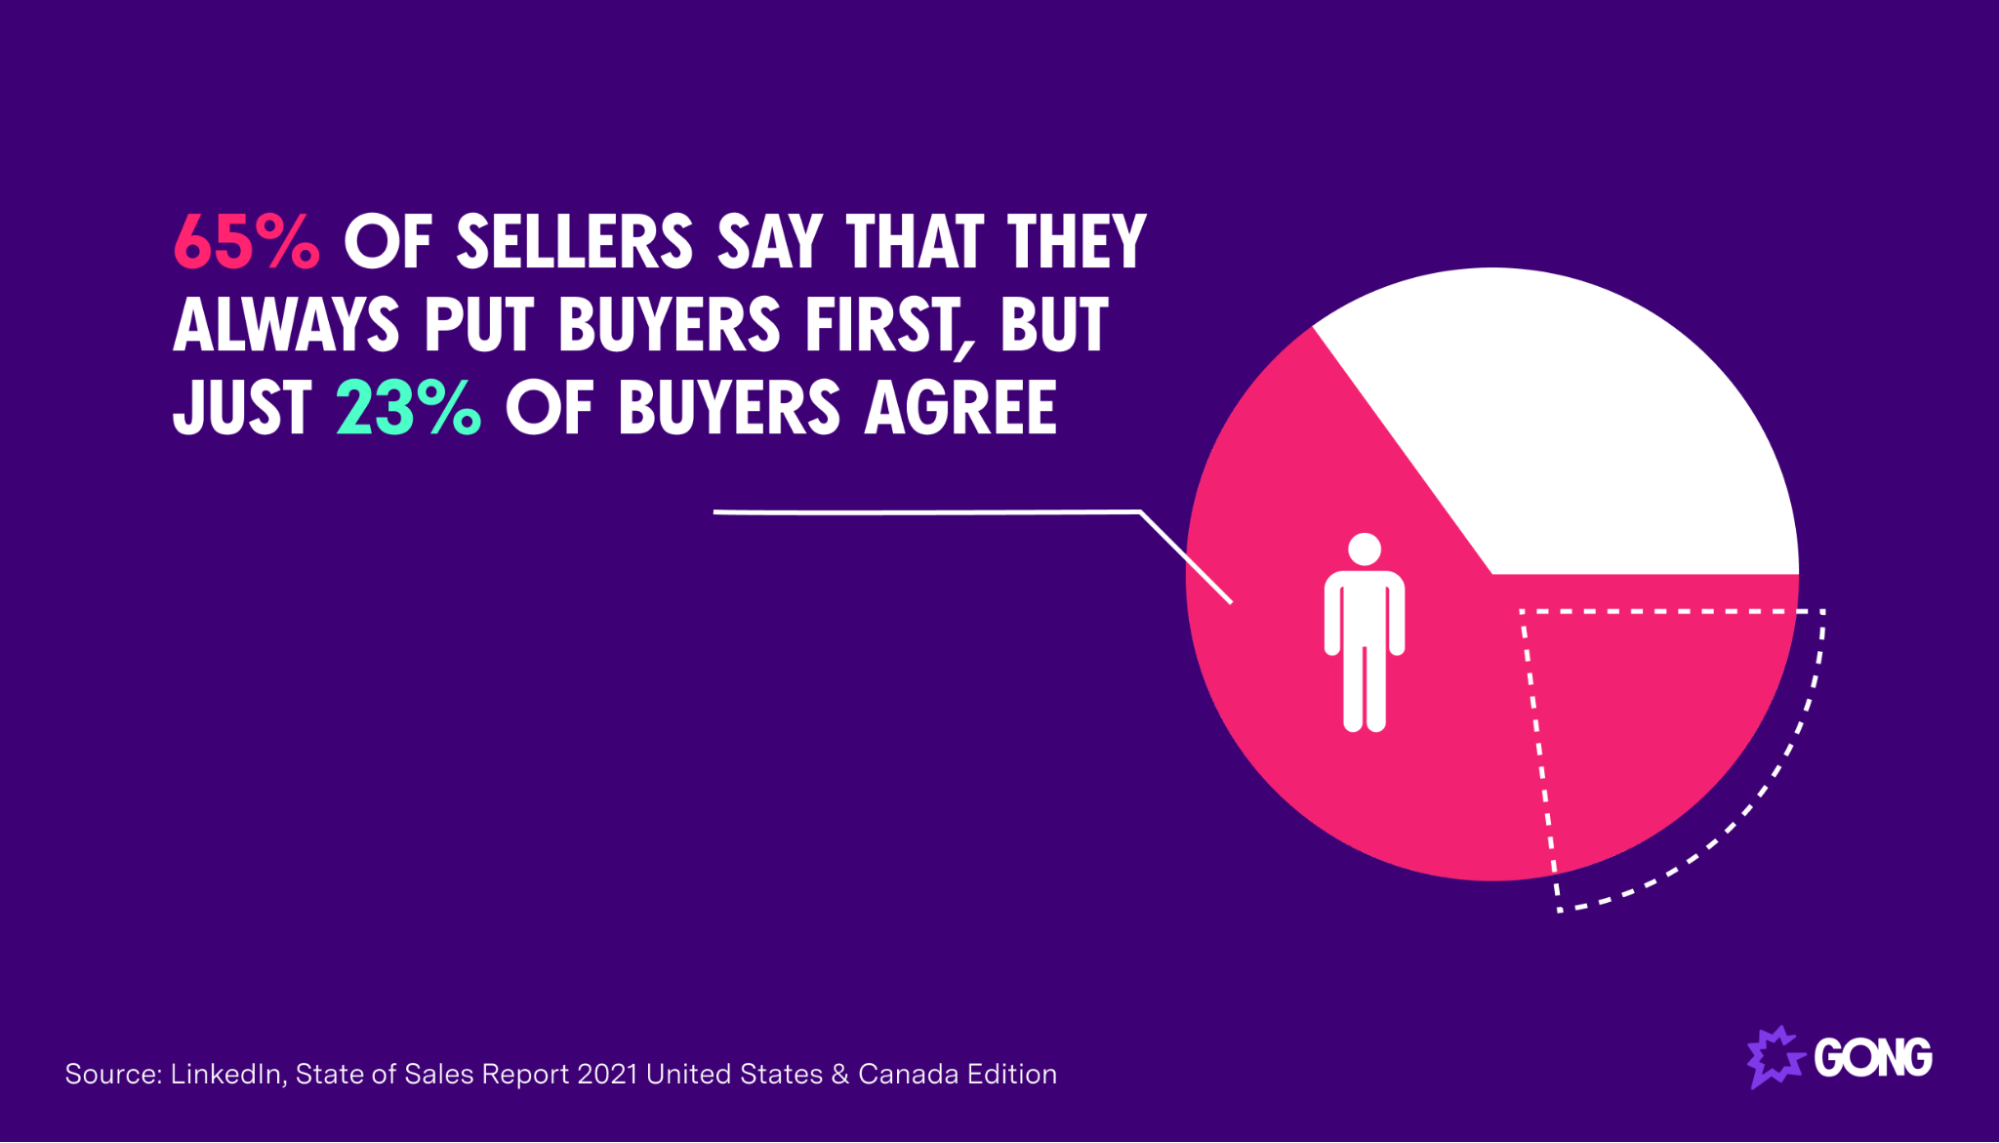 Statistic on putting buyers first